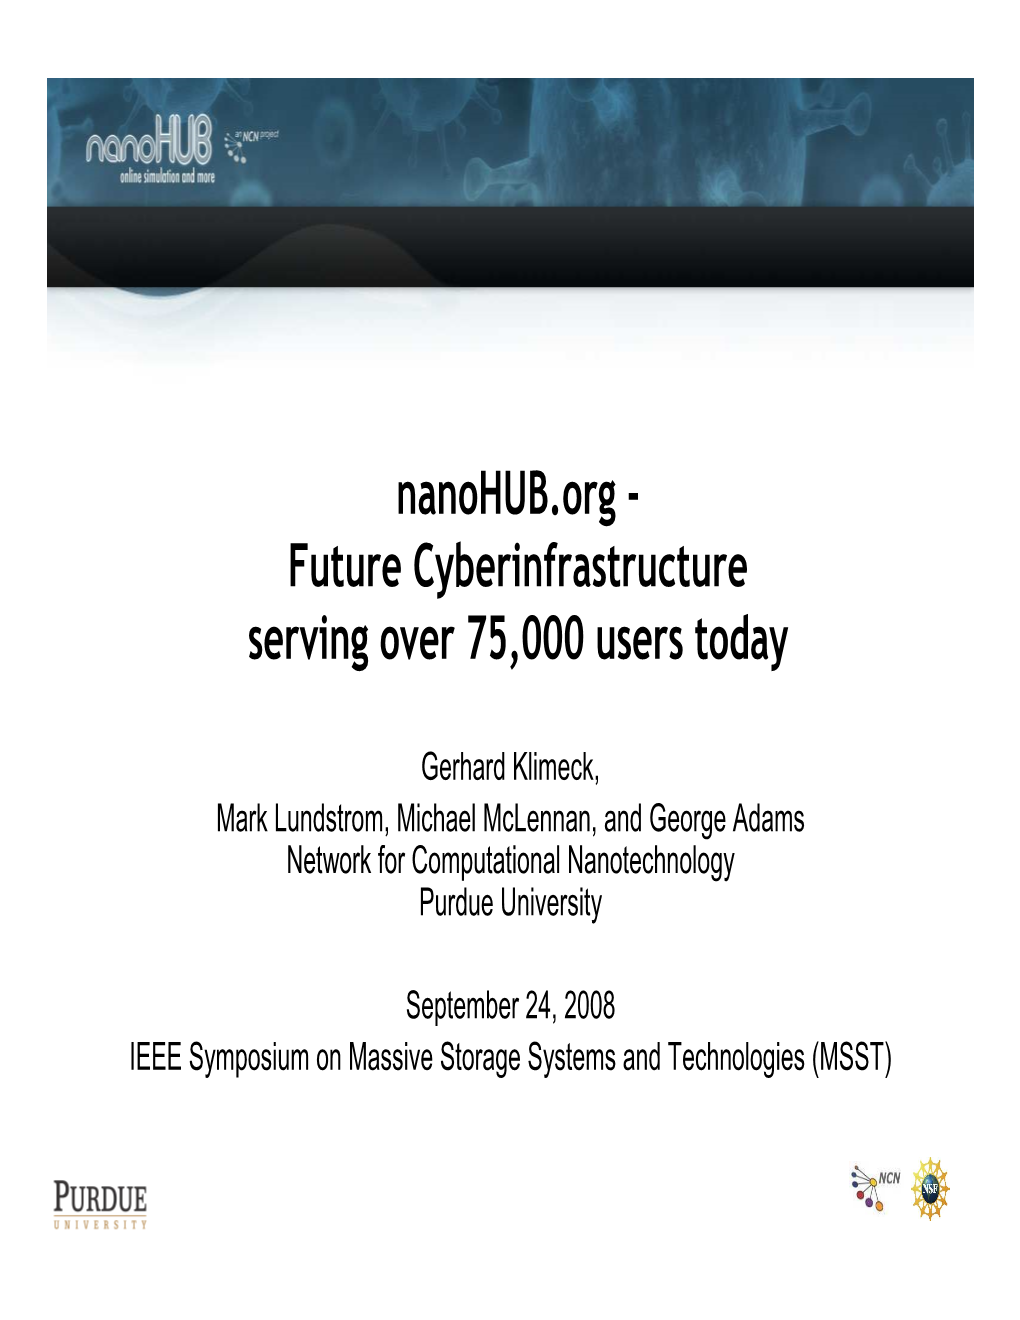 Nanohub.Org - Future Cyberinfrastructure Serving Over 75,000 Users Today